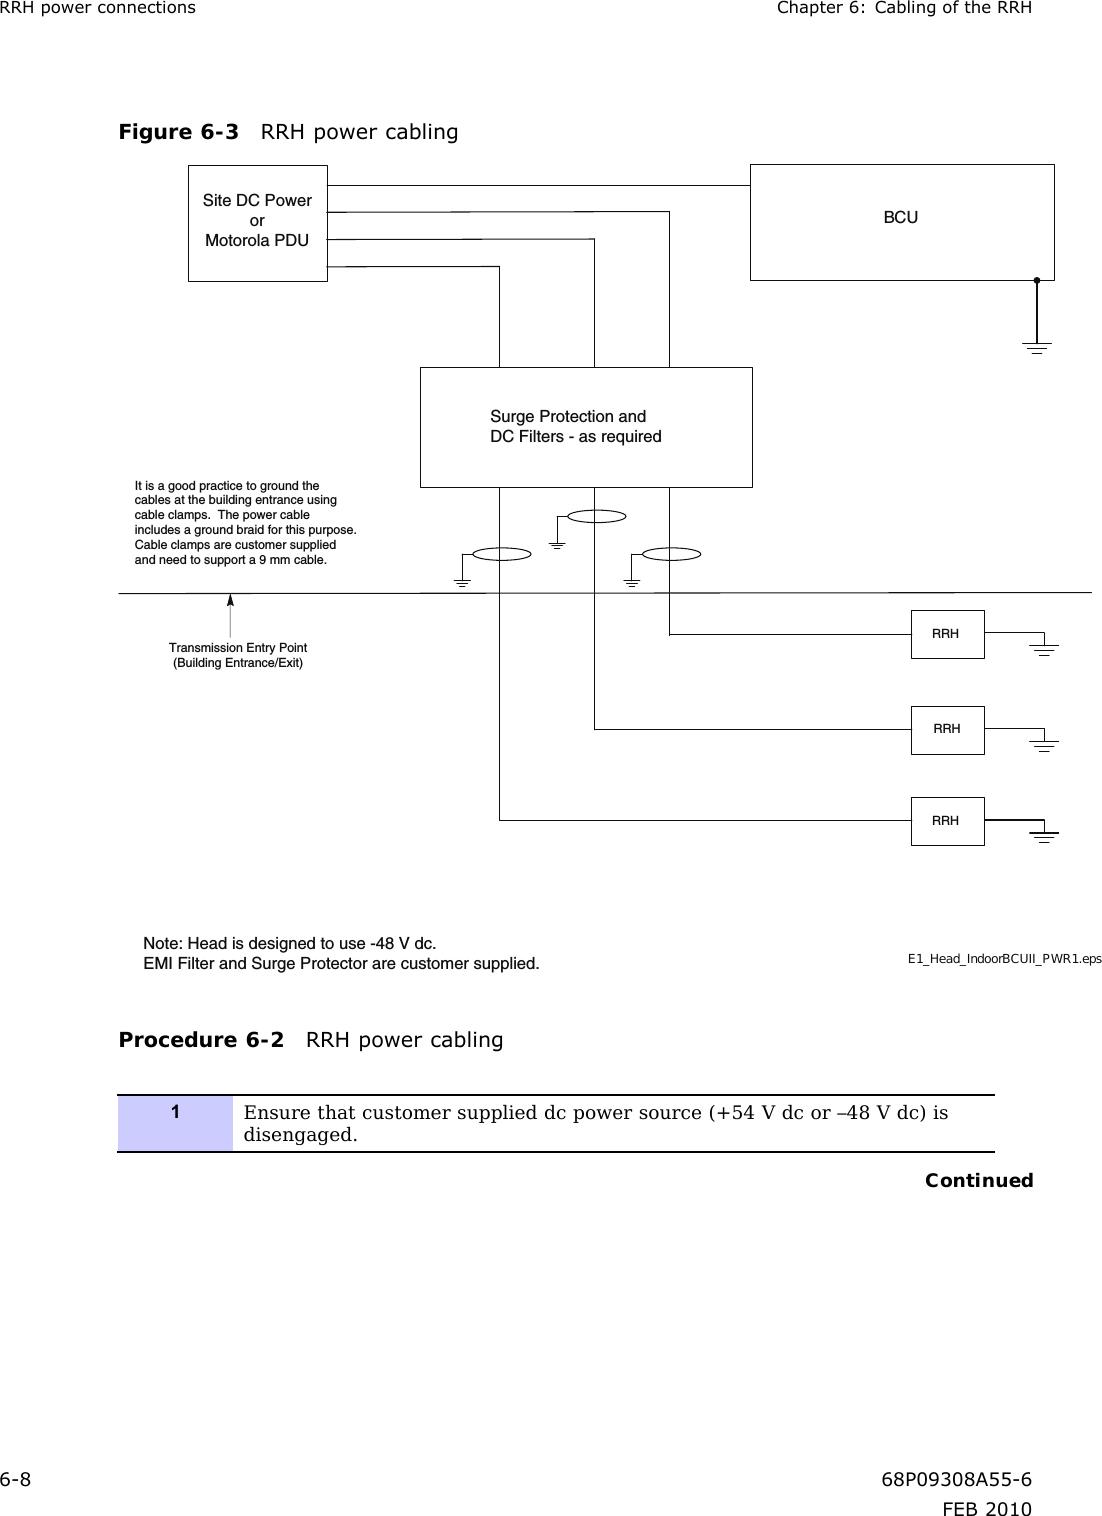 RRHpowerconnectionsChapter6:CablingoftheRRHFigure6-3RRHpowercablingE1_Head_IndoorBCUII_PWR1.epsSite DC PowerorMotorola PDUTransmission Entry Point(Building Entrance/Exit)Note: Head is designed to use -48 V dc.EMI Filter and Surge Protector are customer supplied.BCU RRHRRHRRHIt is a good practice to ground the cables at the building entrance using cable clamps.  The power cable includes a ground braid for this purpose.  Cable clamps are customer supplied and need to support a 9 mm cable.Surge Protection andDC Filters - as requiredProcedure6-2RRHpowercabling1Ensurethatcustomersupplieddcpowersource(+54Vdcor–48Vdc)isdisengaged.Continued6-868P09308A55-6FEB2010